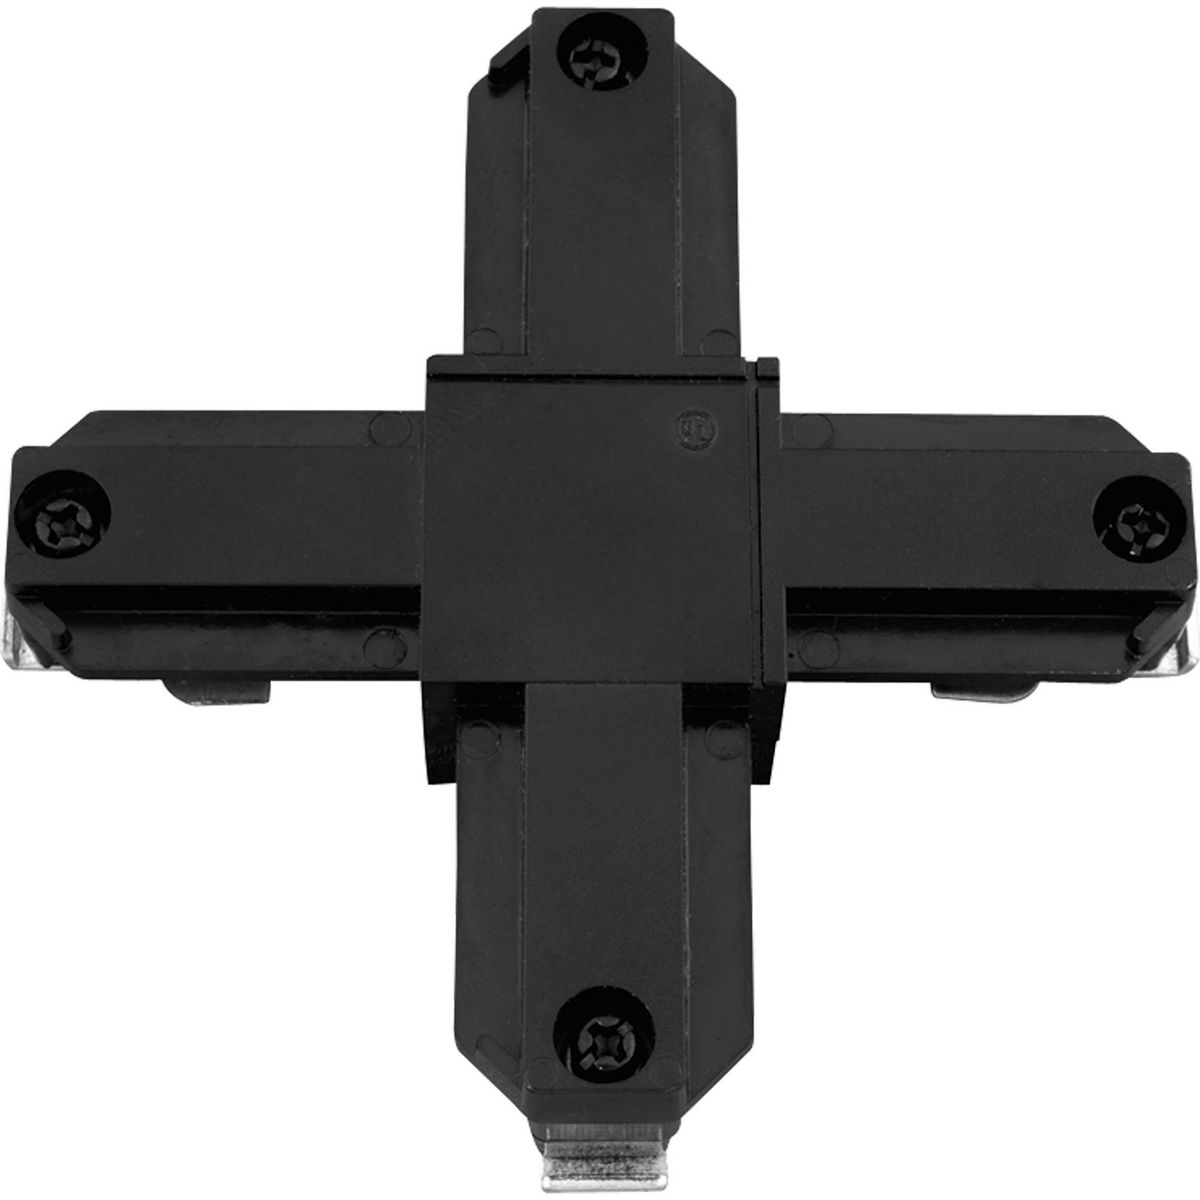 P8723-31 CROSS TRACK CONNECTOR